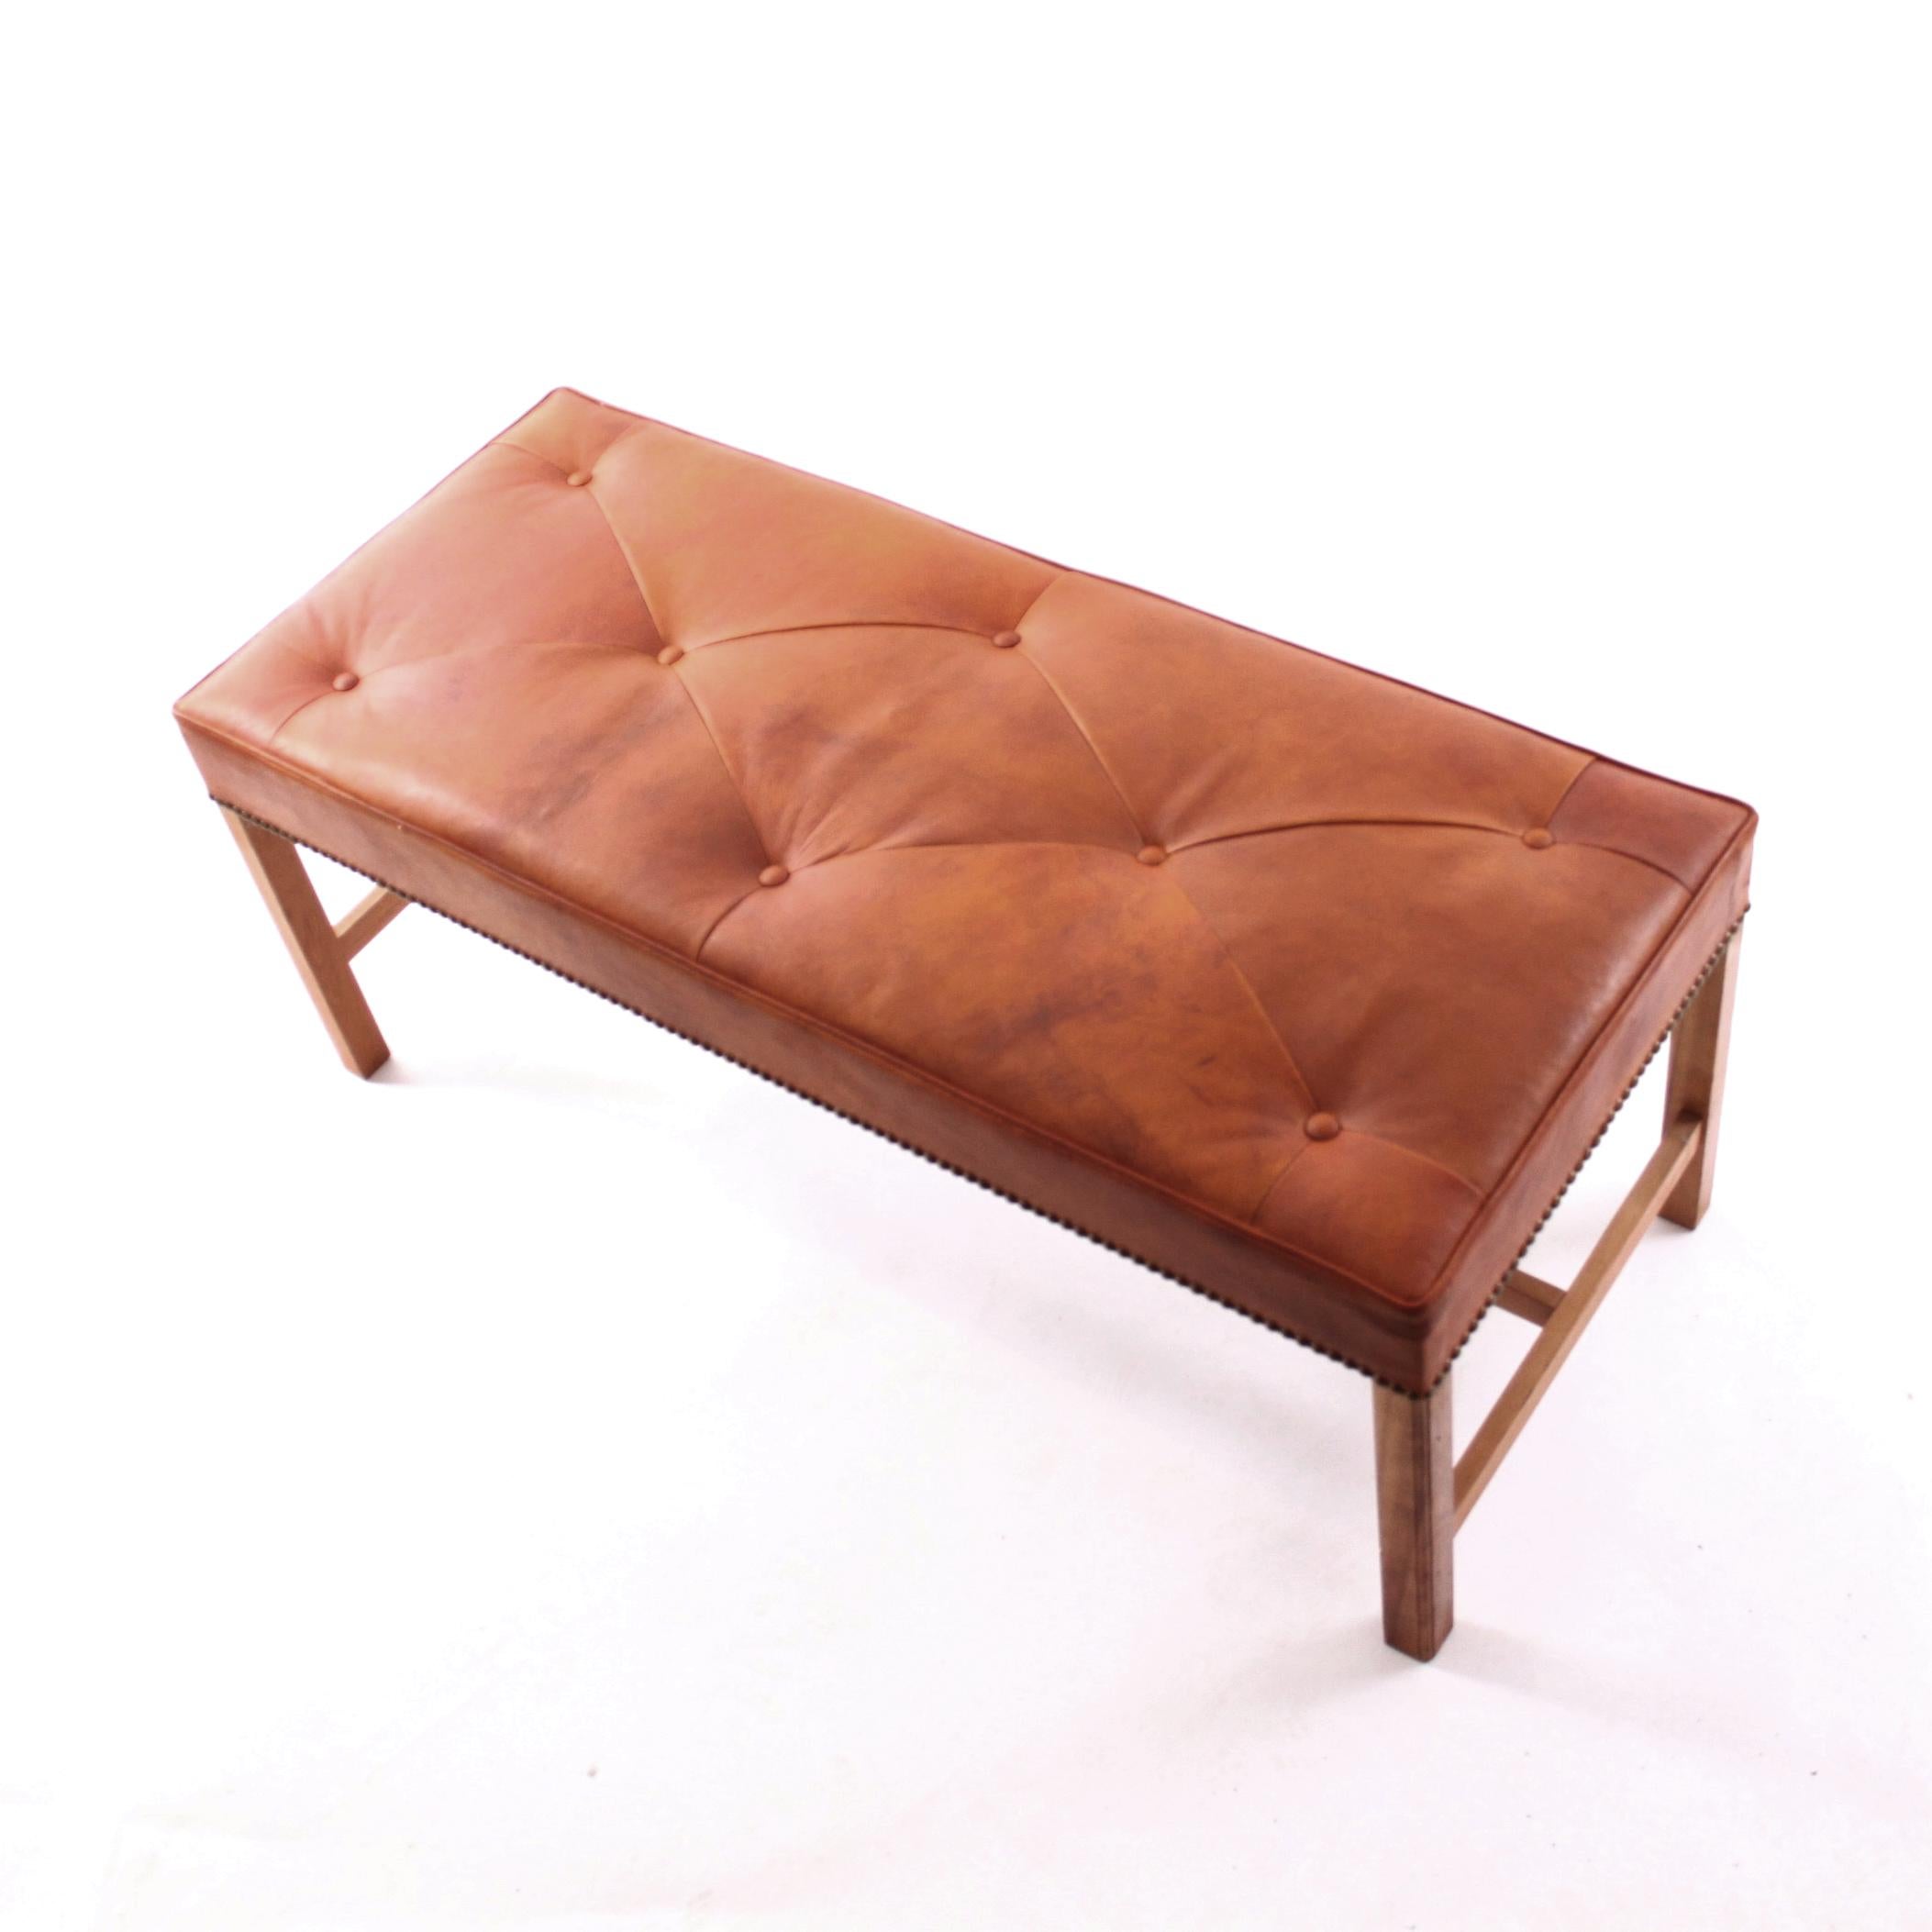 Swedish Pair of Josef Frank Benches, Mahogany and Niger leather, 1950s